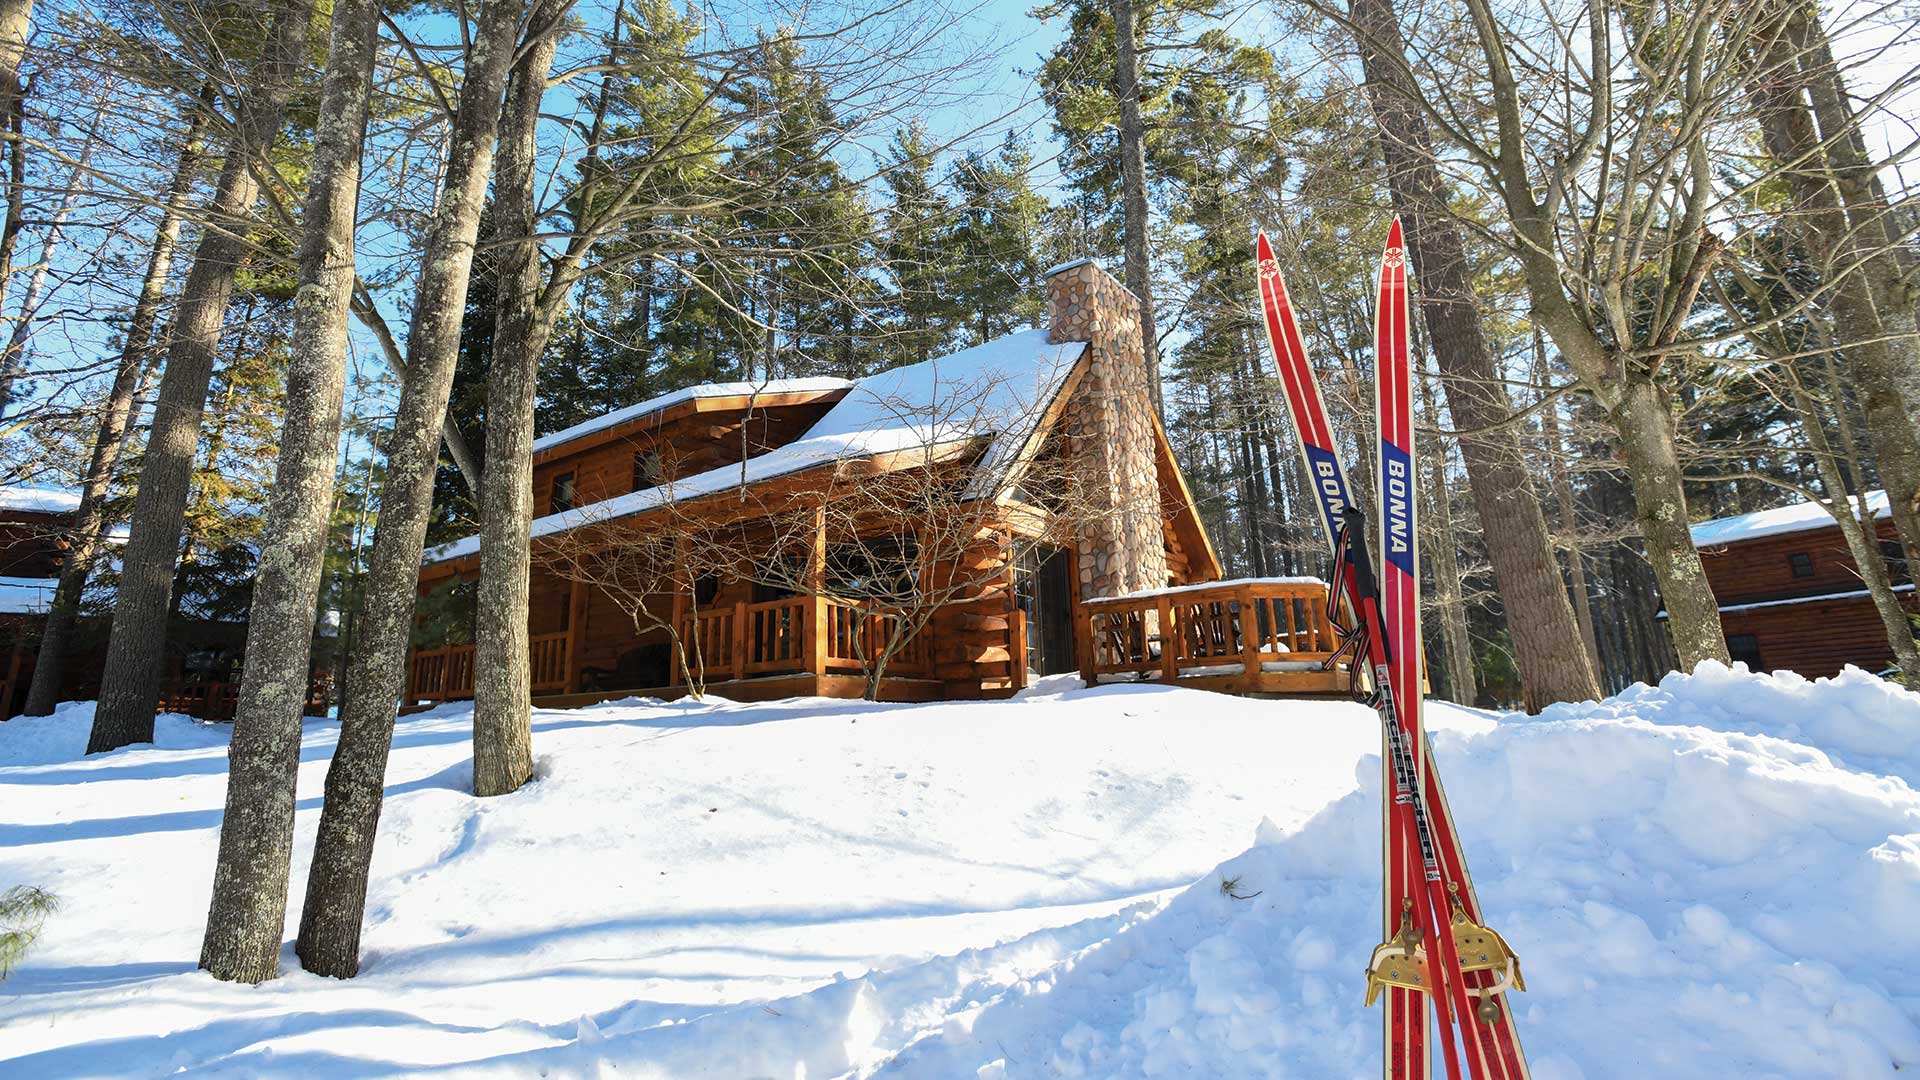 Cabin Covered in snow with skis rising up from the snow